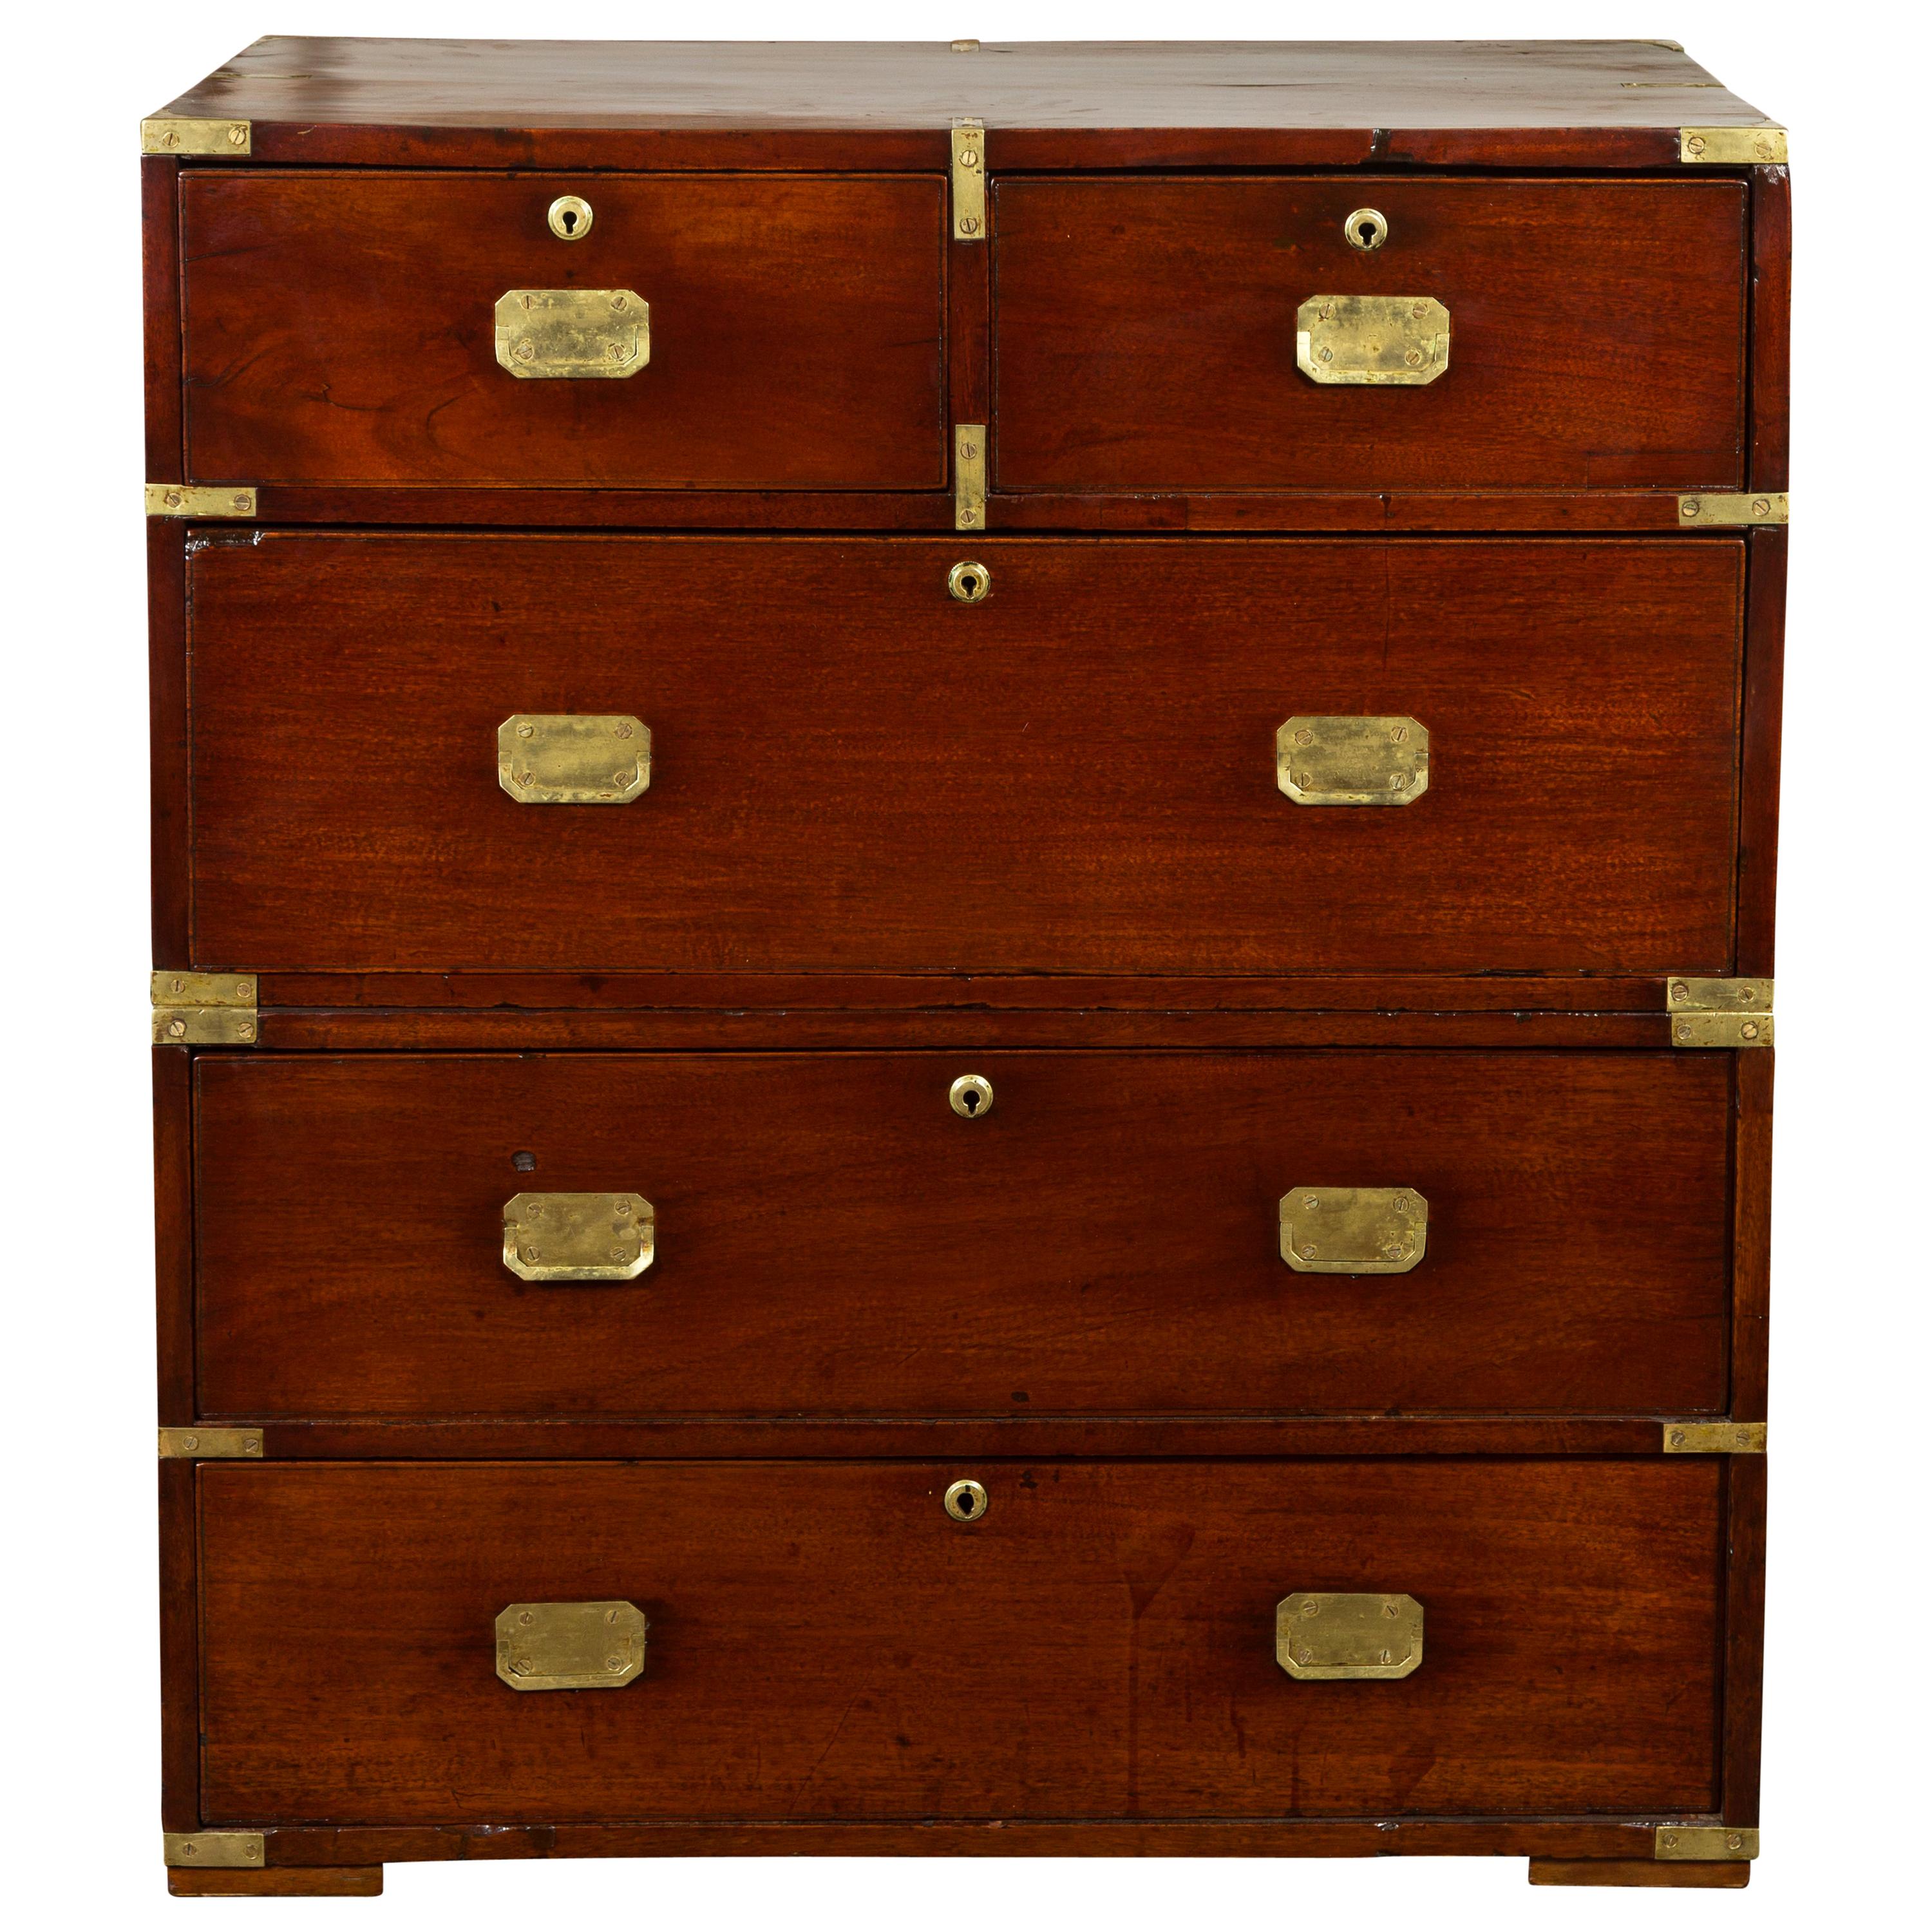 English 1860s Mahogany Campaign Chest with Small Desk Area and Brass Hardware